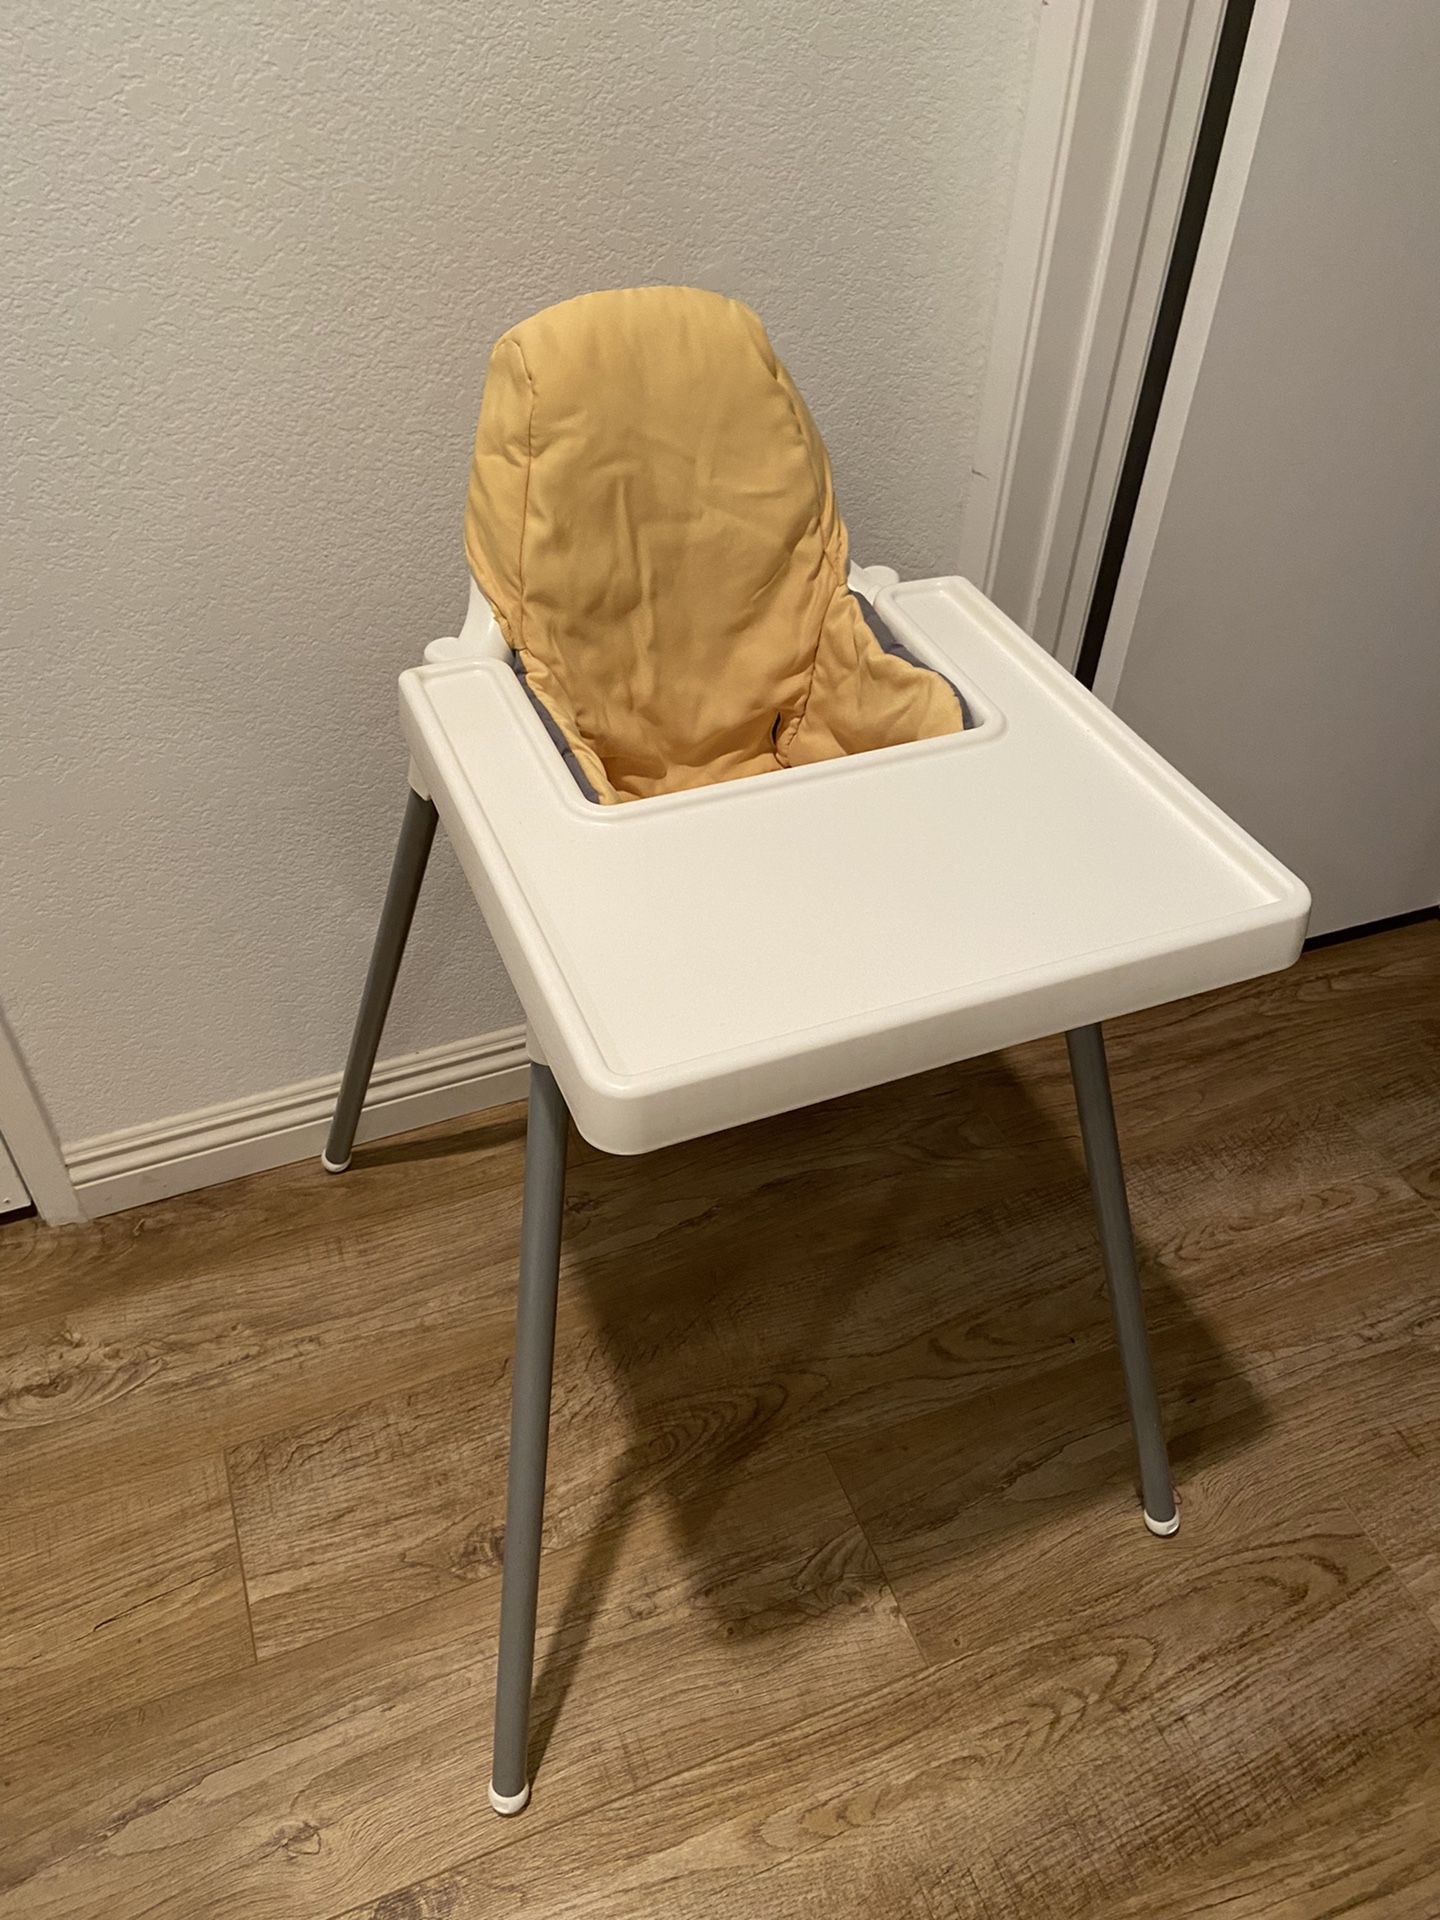 IKEA High Chair With Cushion And Tray